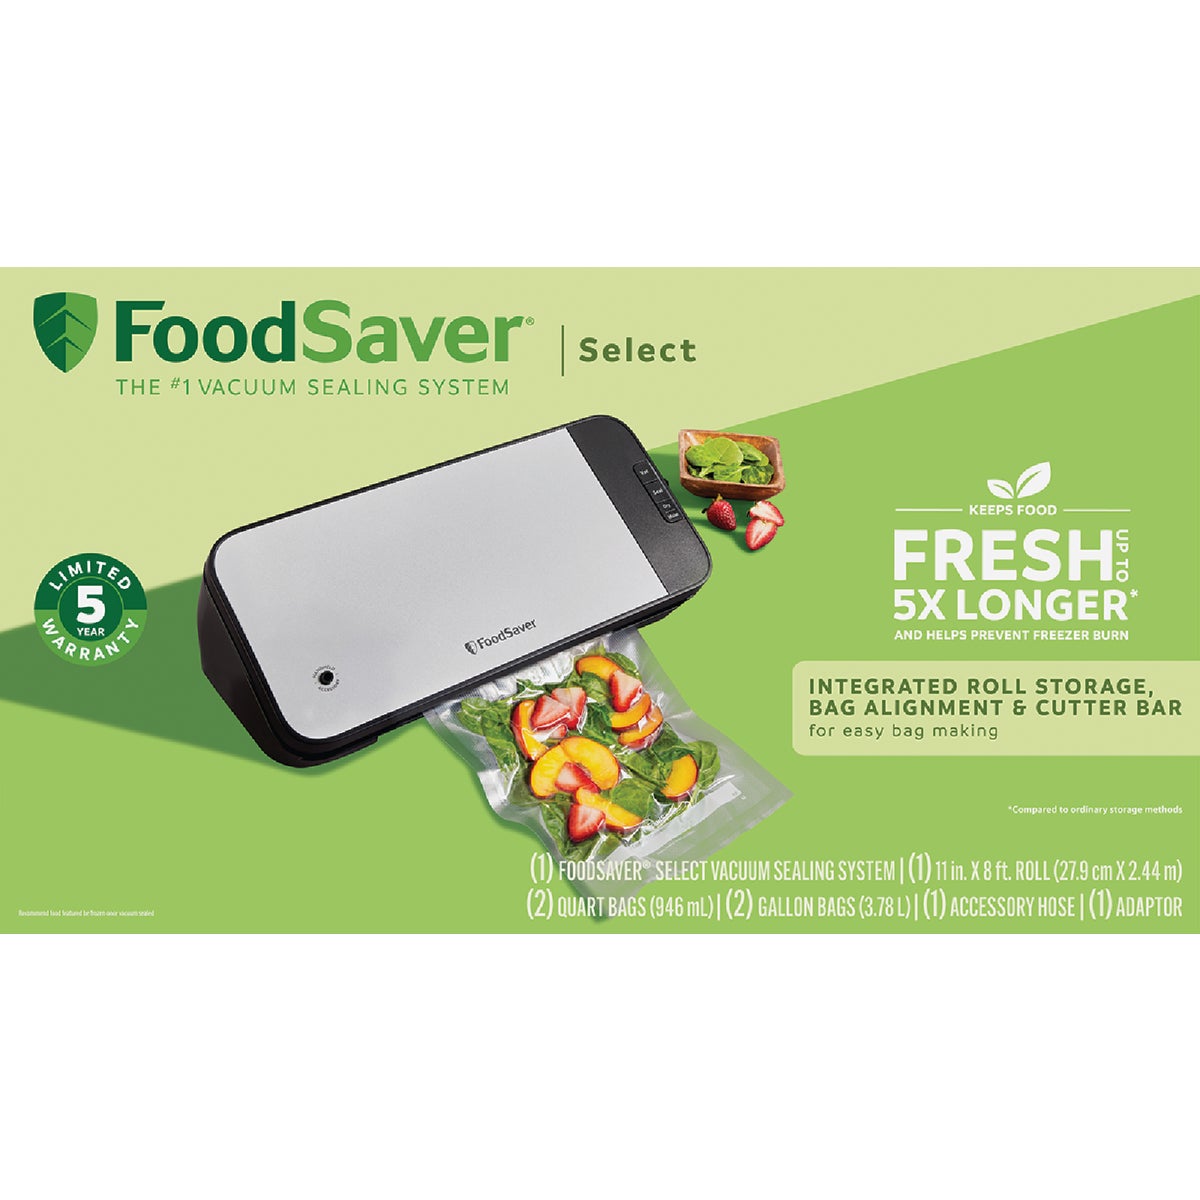 Item 650324, FoodSaver Vaccum Food Sealer has more great features: Compatible with all 